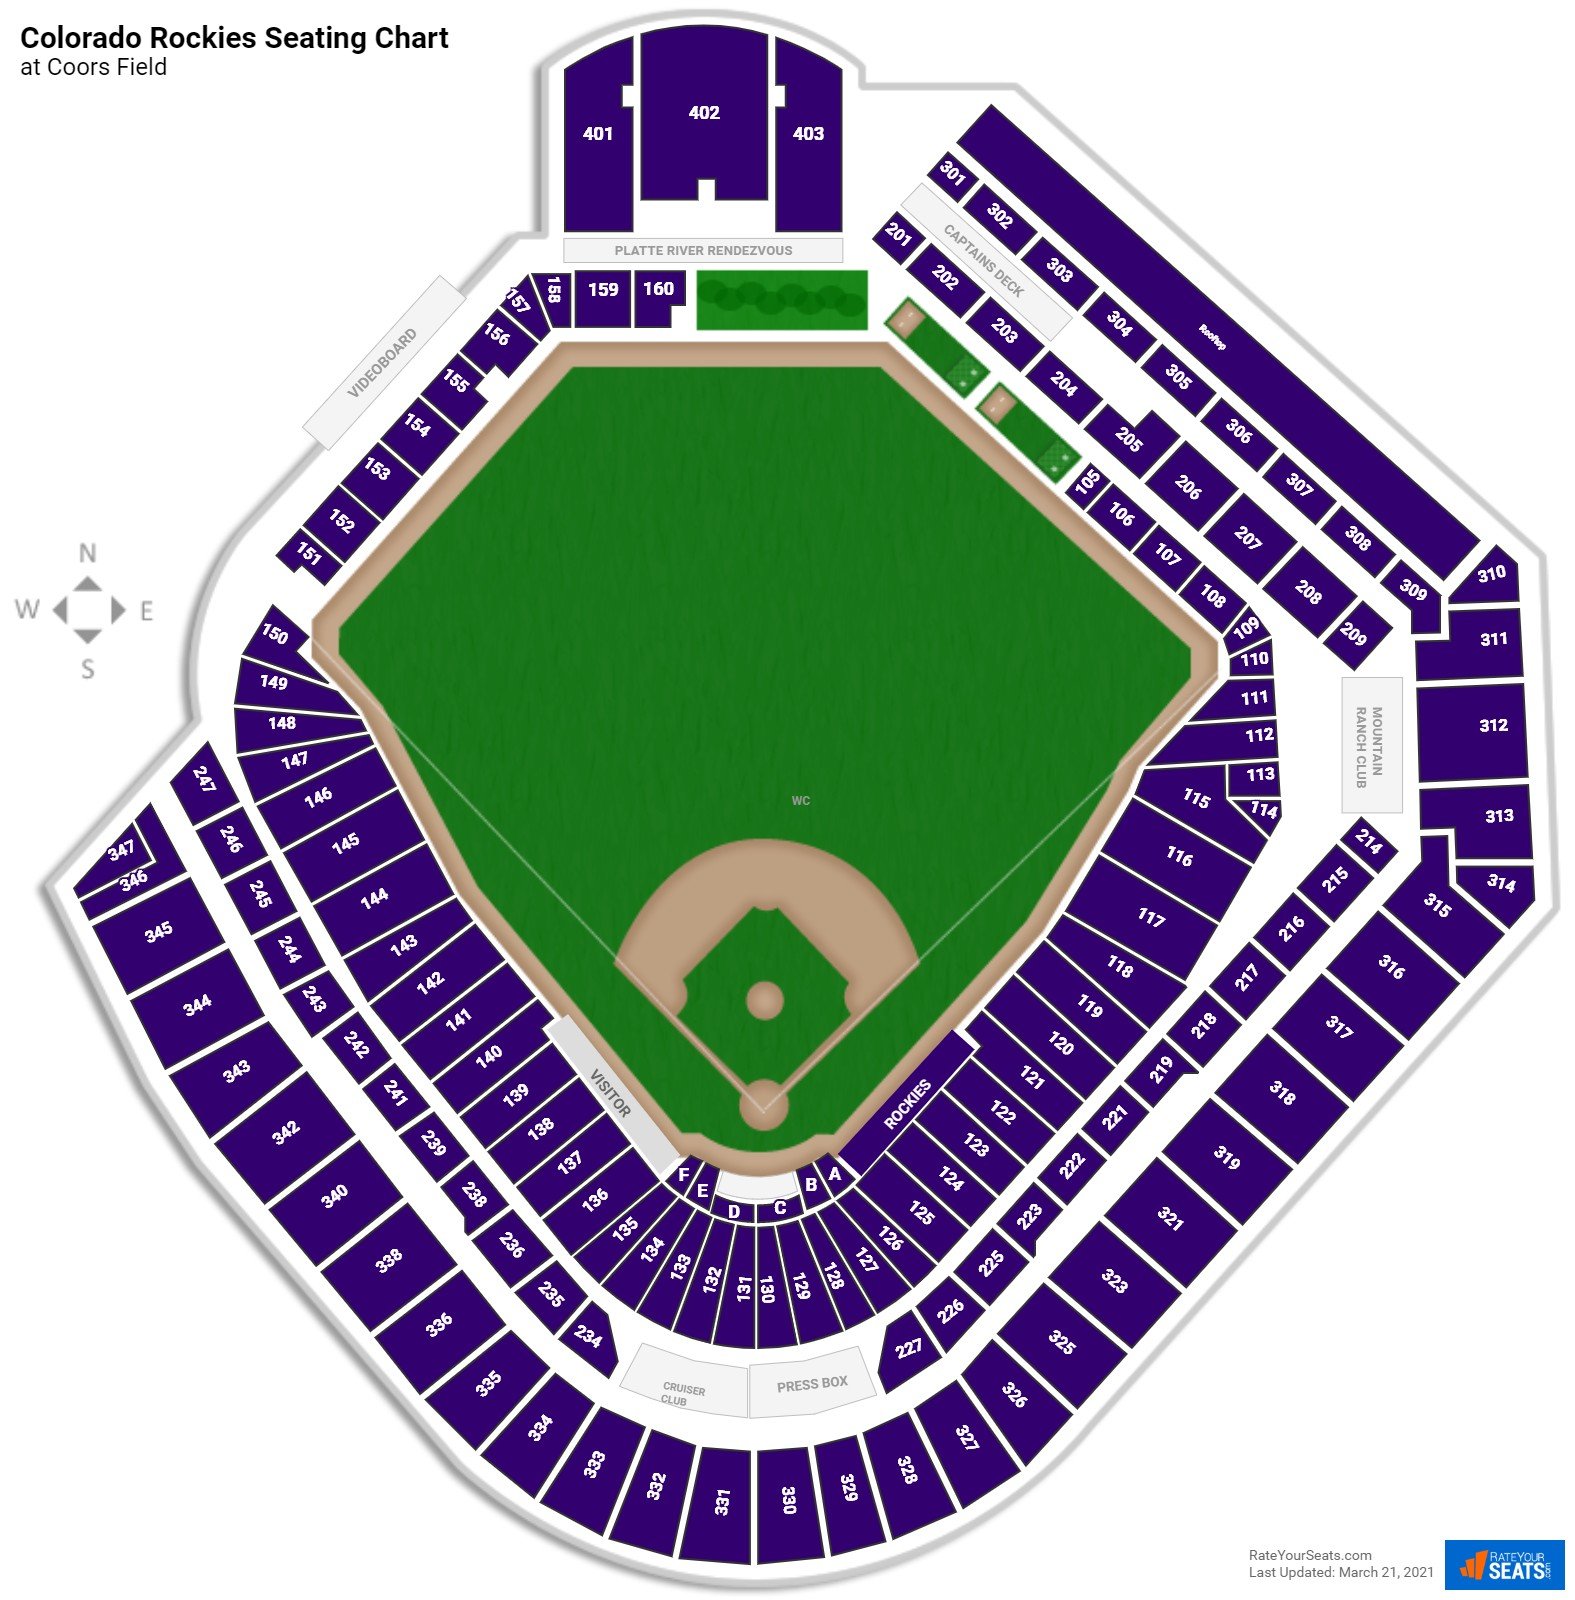 Coors Field Seating Chart With Seat Numbers